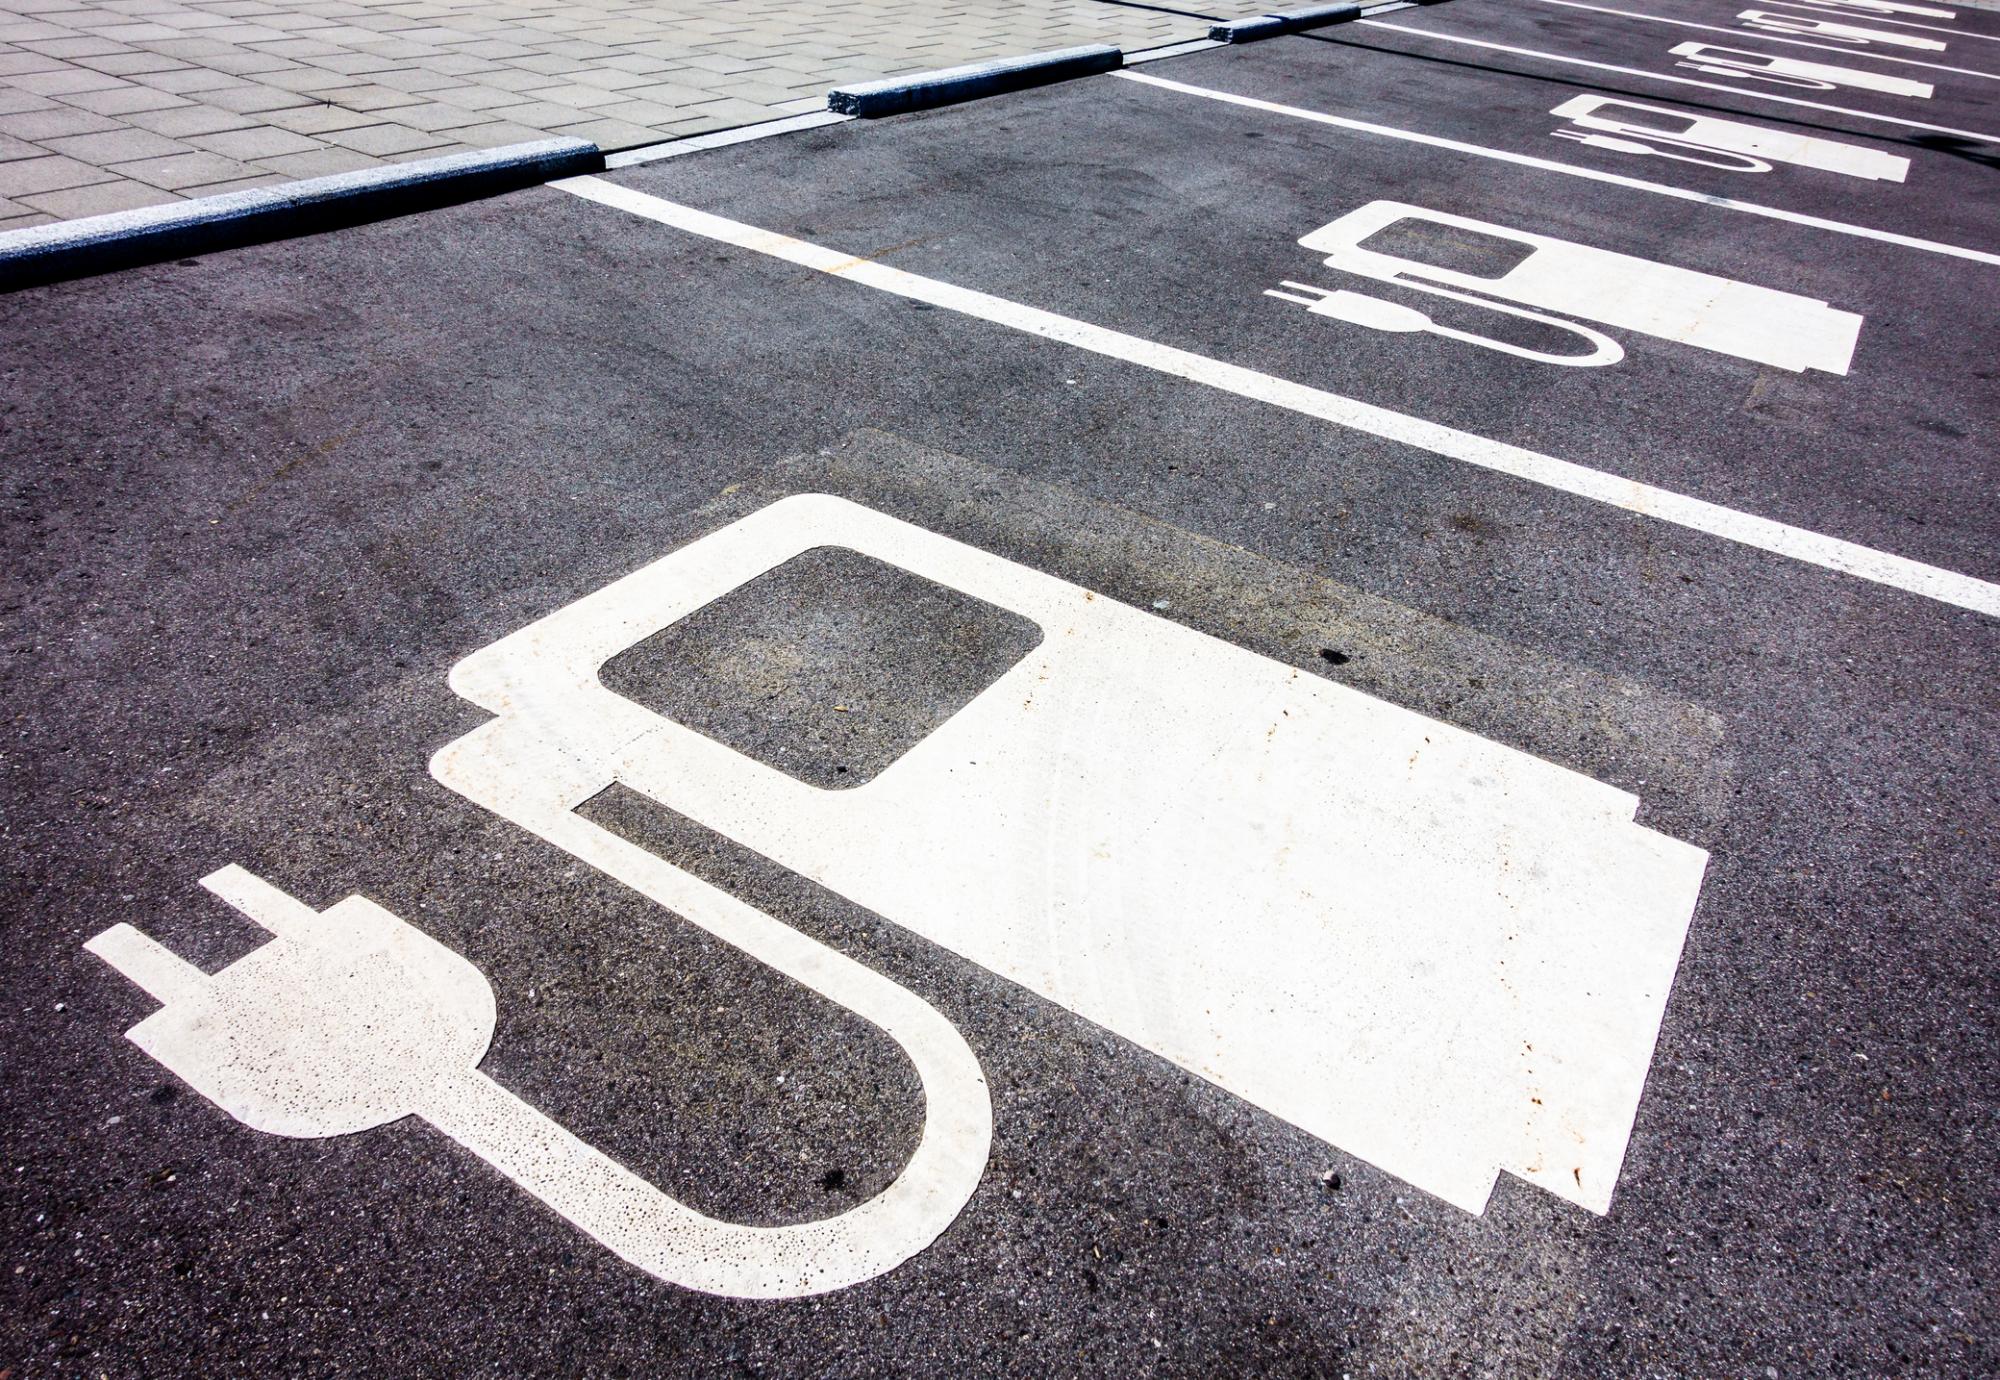 Electric vehicle charging spot